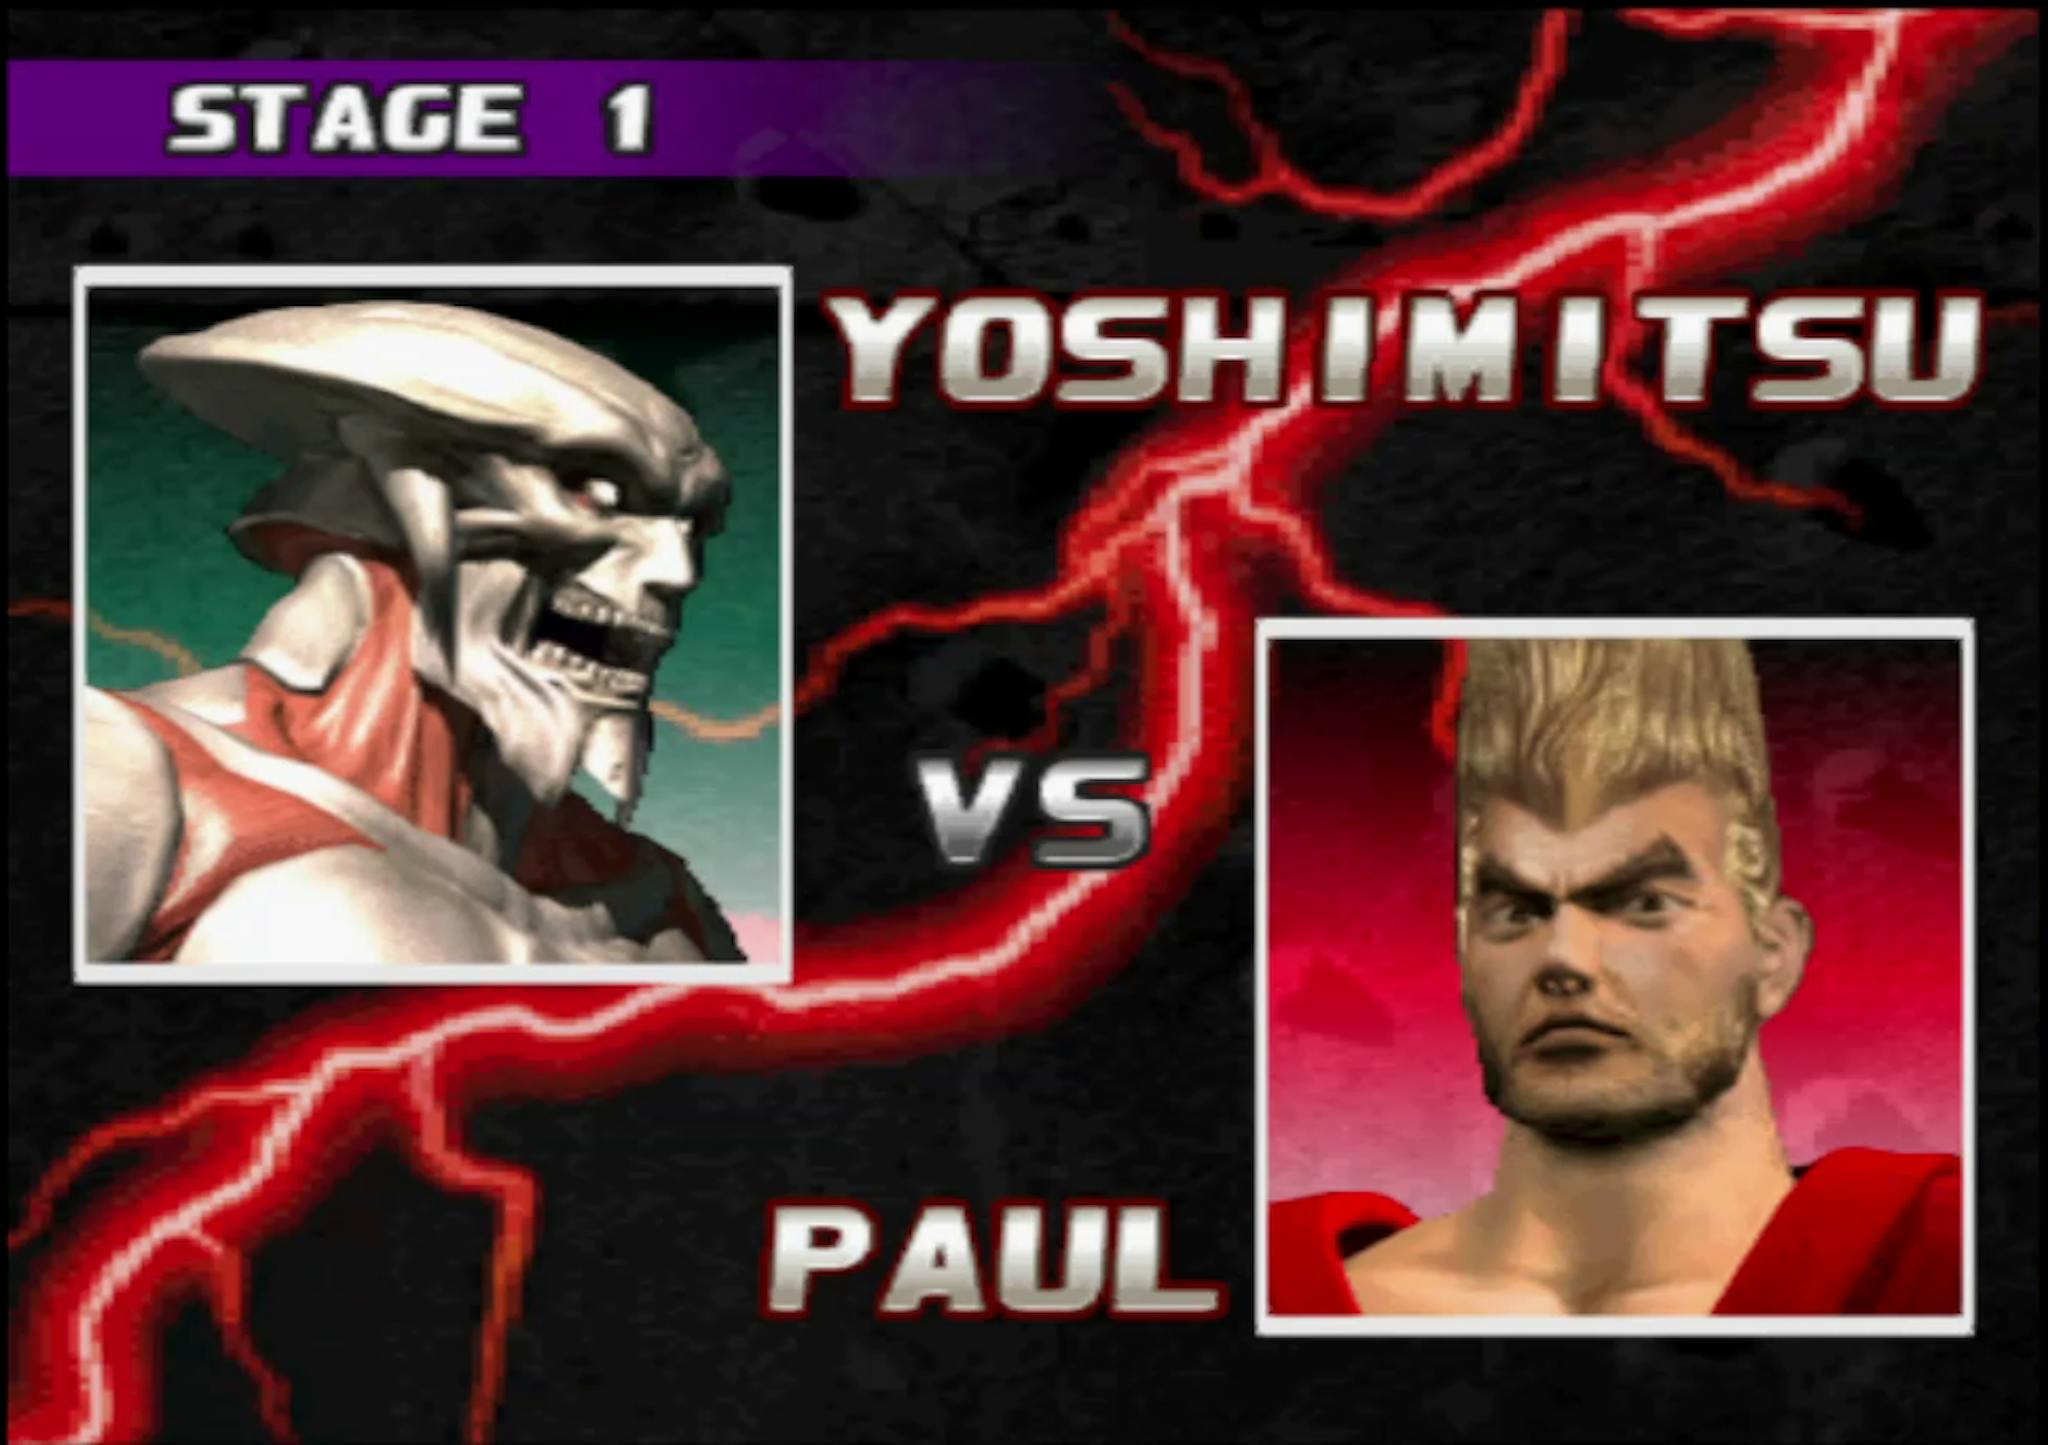 Jesus, Yoshimitsu, why so pissed? Did someone steal your cans of Sakuma drops?